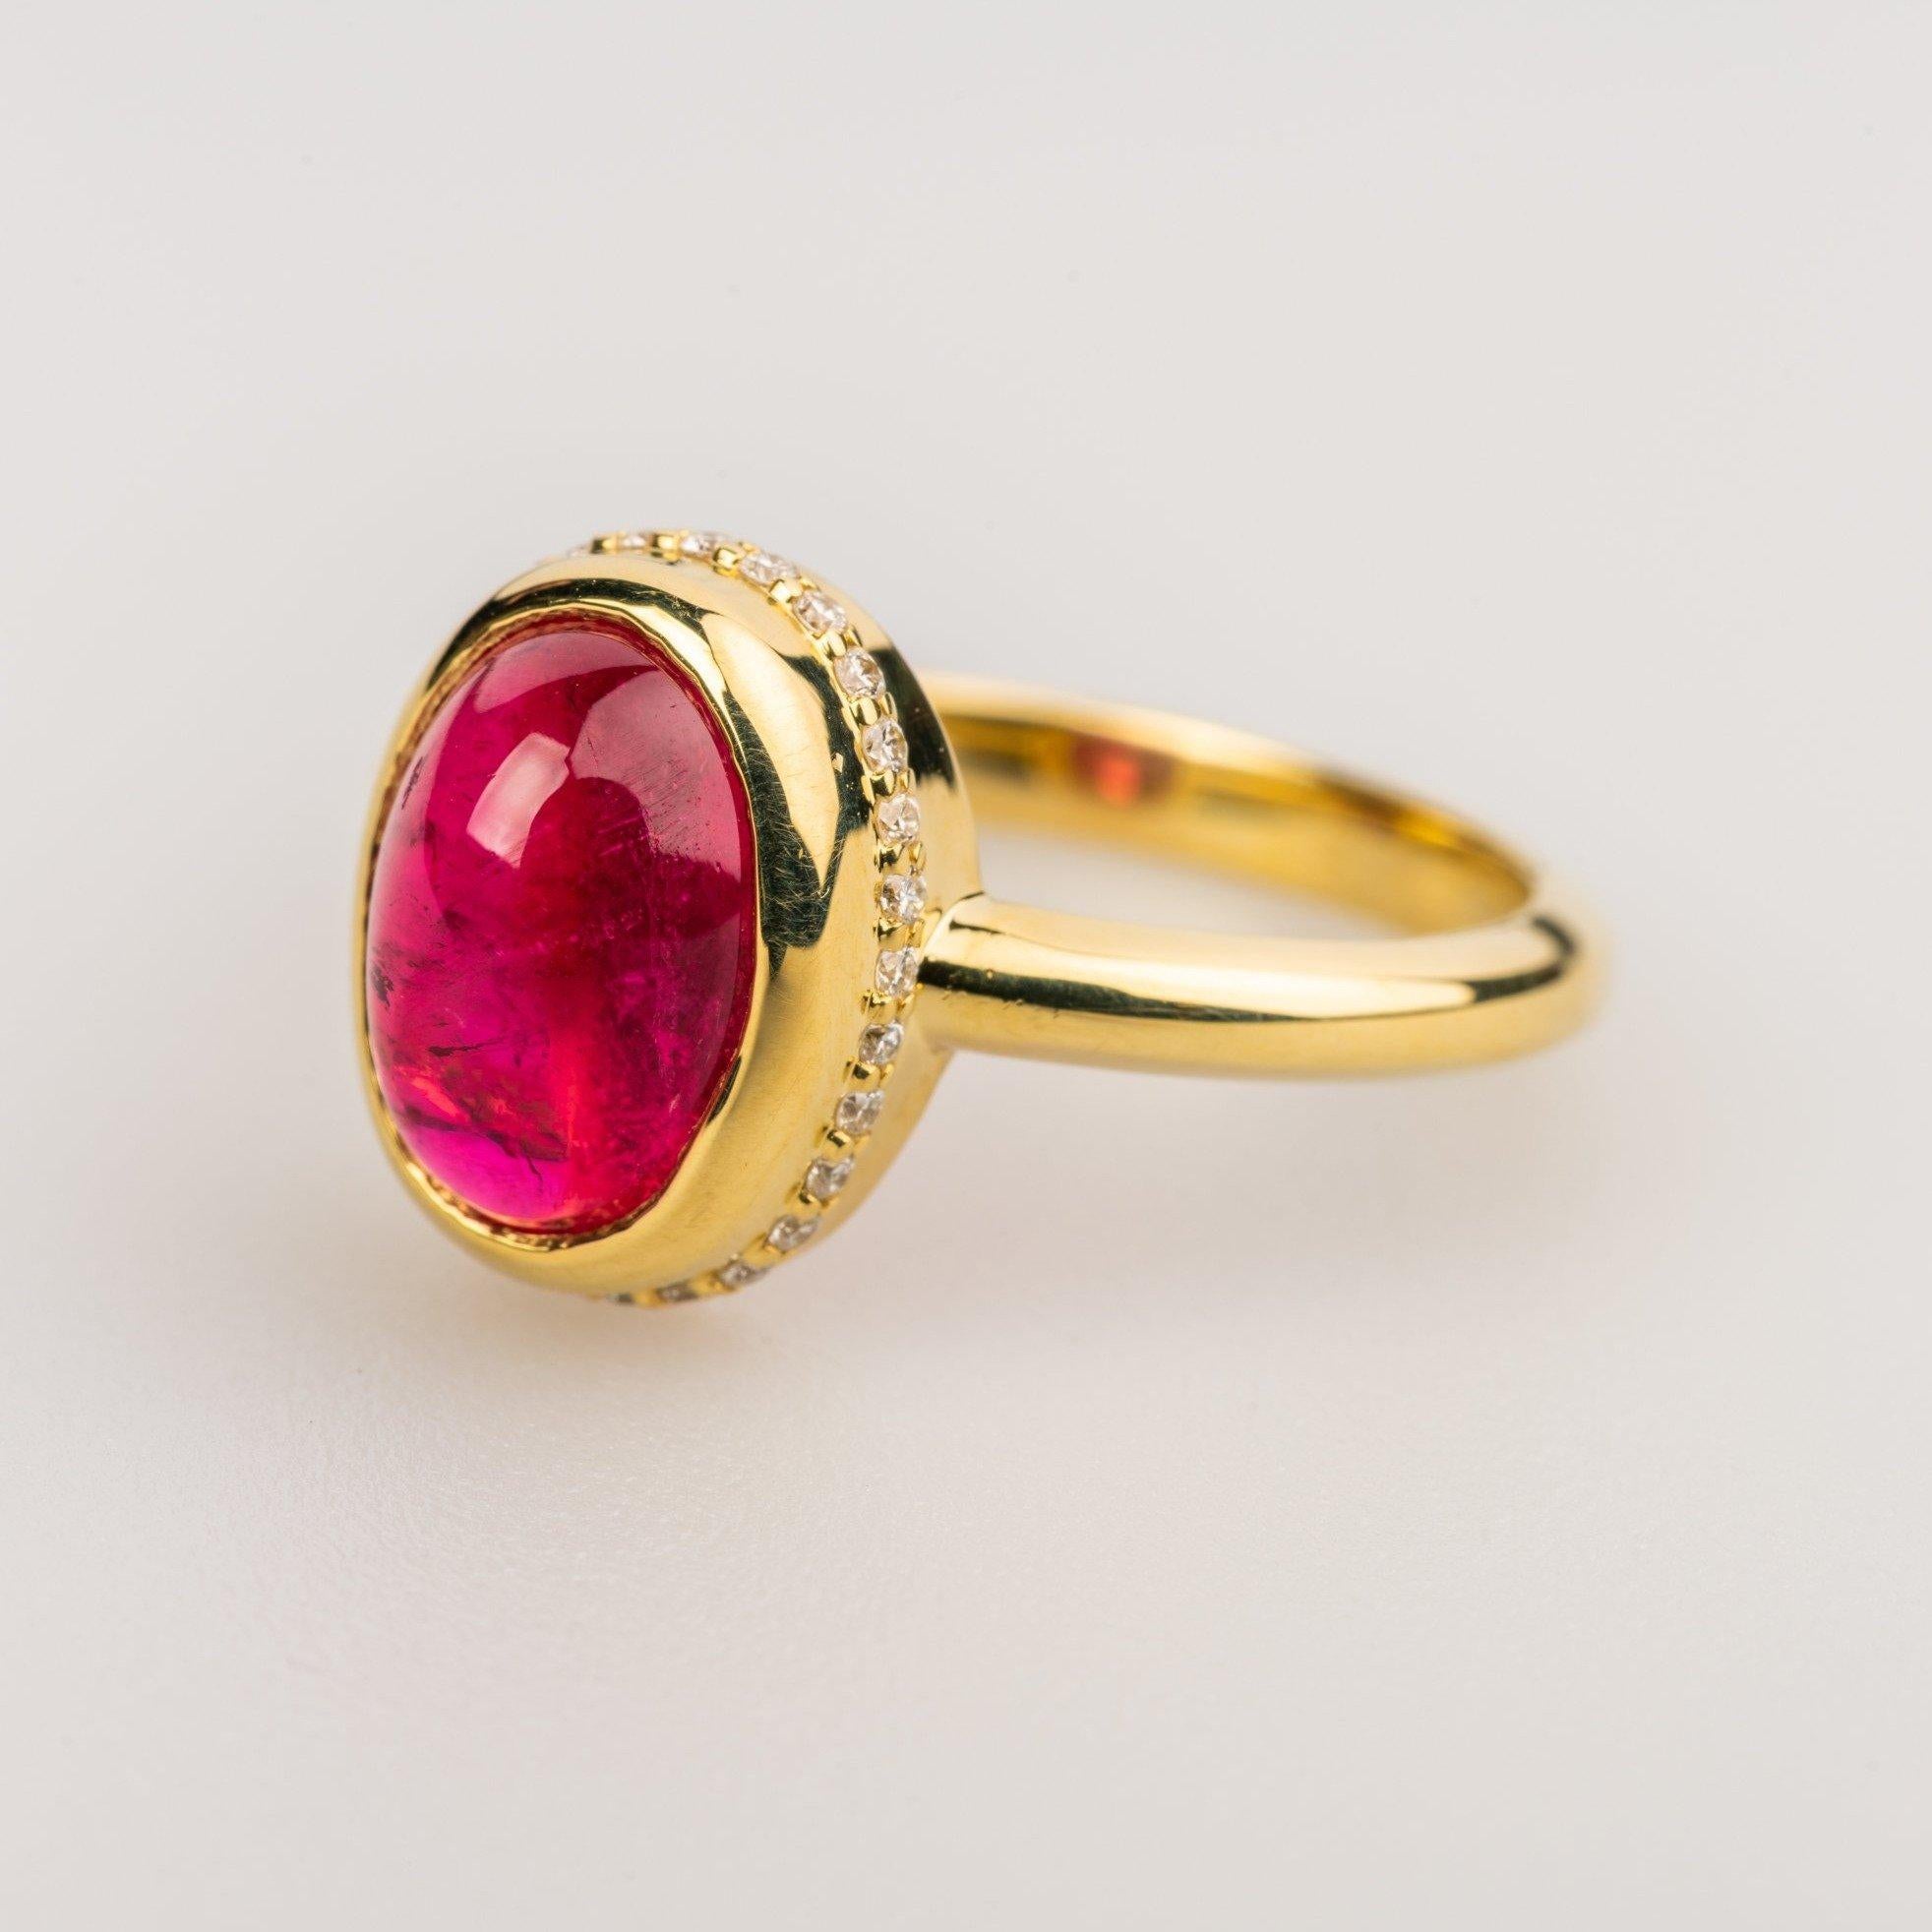 An 18k yellow gold ring featuring one bezel set cabochon red tourmaline, 4.5 carats, and accented by 29- 1mm round full cut white diamonds for a total of .145 carats, F color VS clarity. Ring size 6.75. This ring was made and designed by Sydney